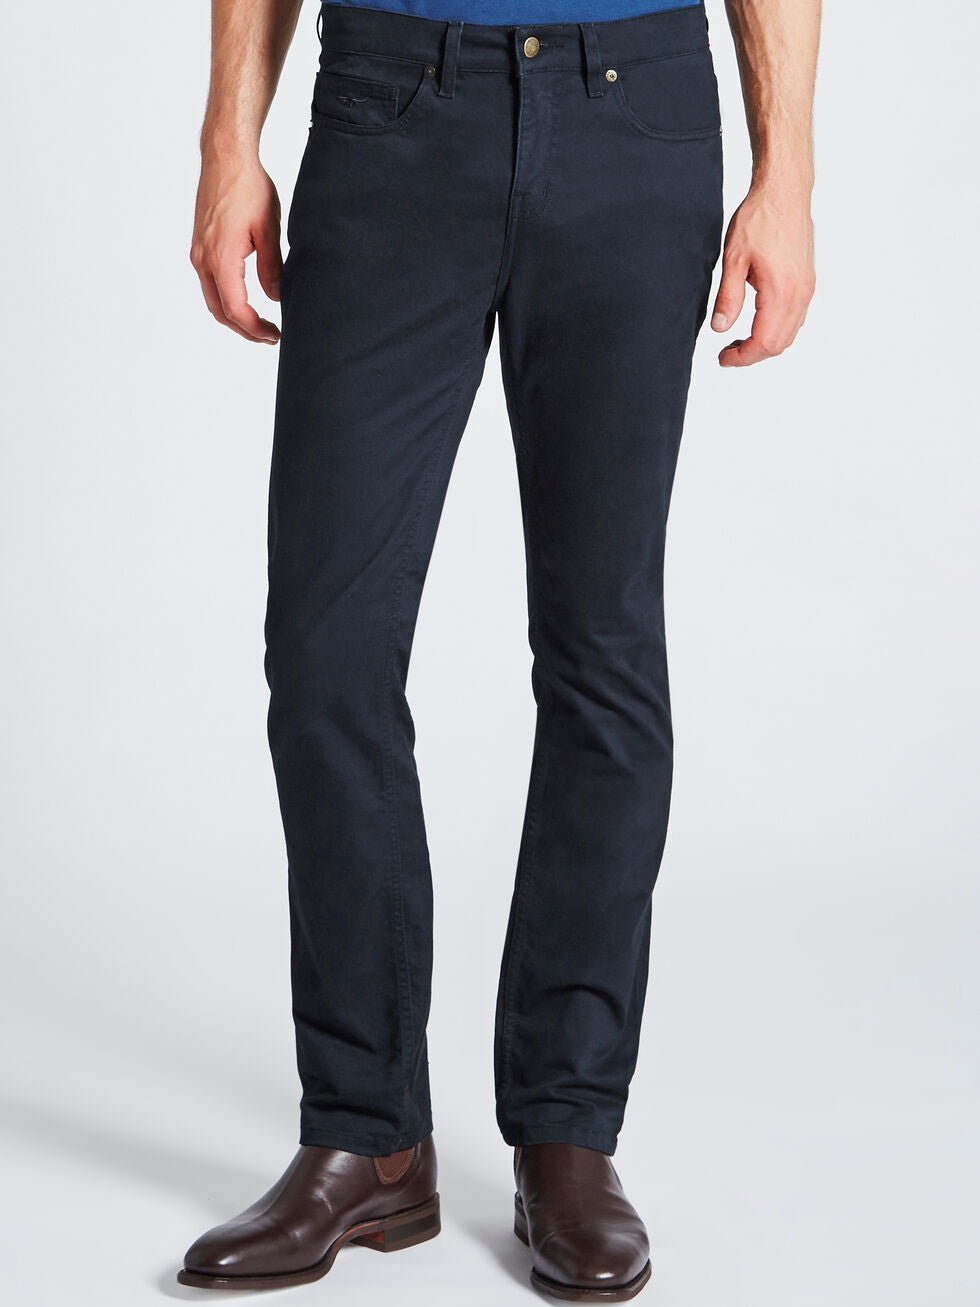 RM Williams Ramco Moleskin Jean - Mens from Humes Outfitters